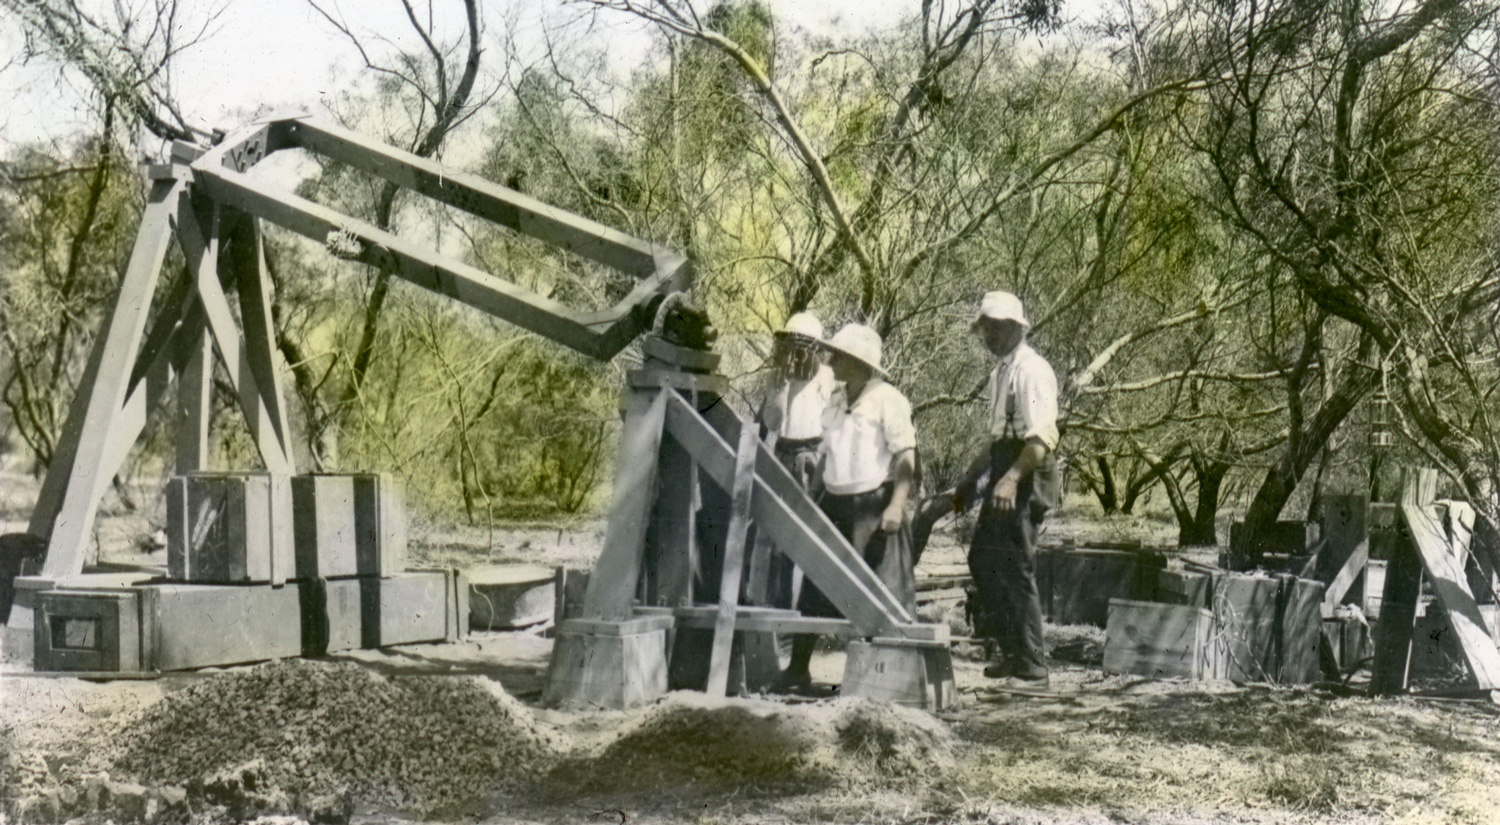 A wooden structure made of beams and rotational elements are set on the ground in a wooded area with short, sparse trees and an open sky. Three scientists wearing white hats are standing next to the structure.